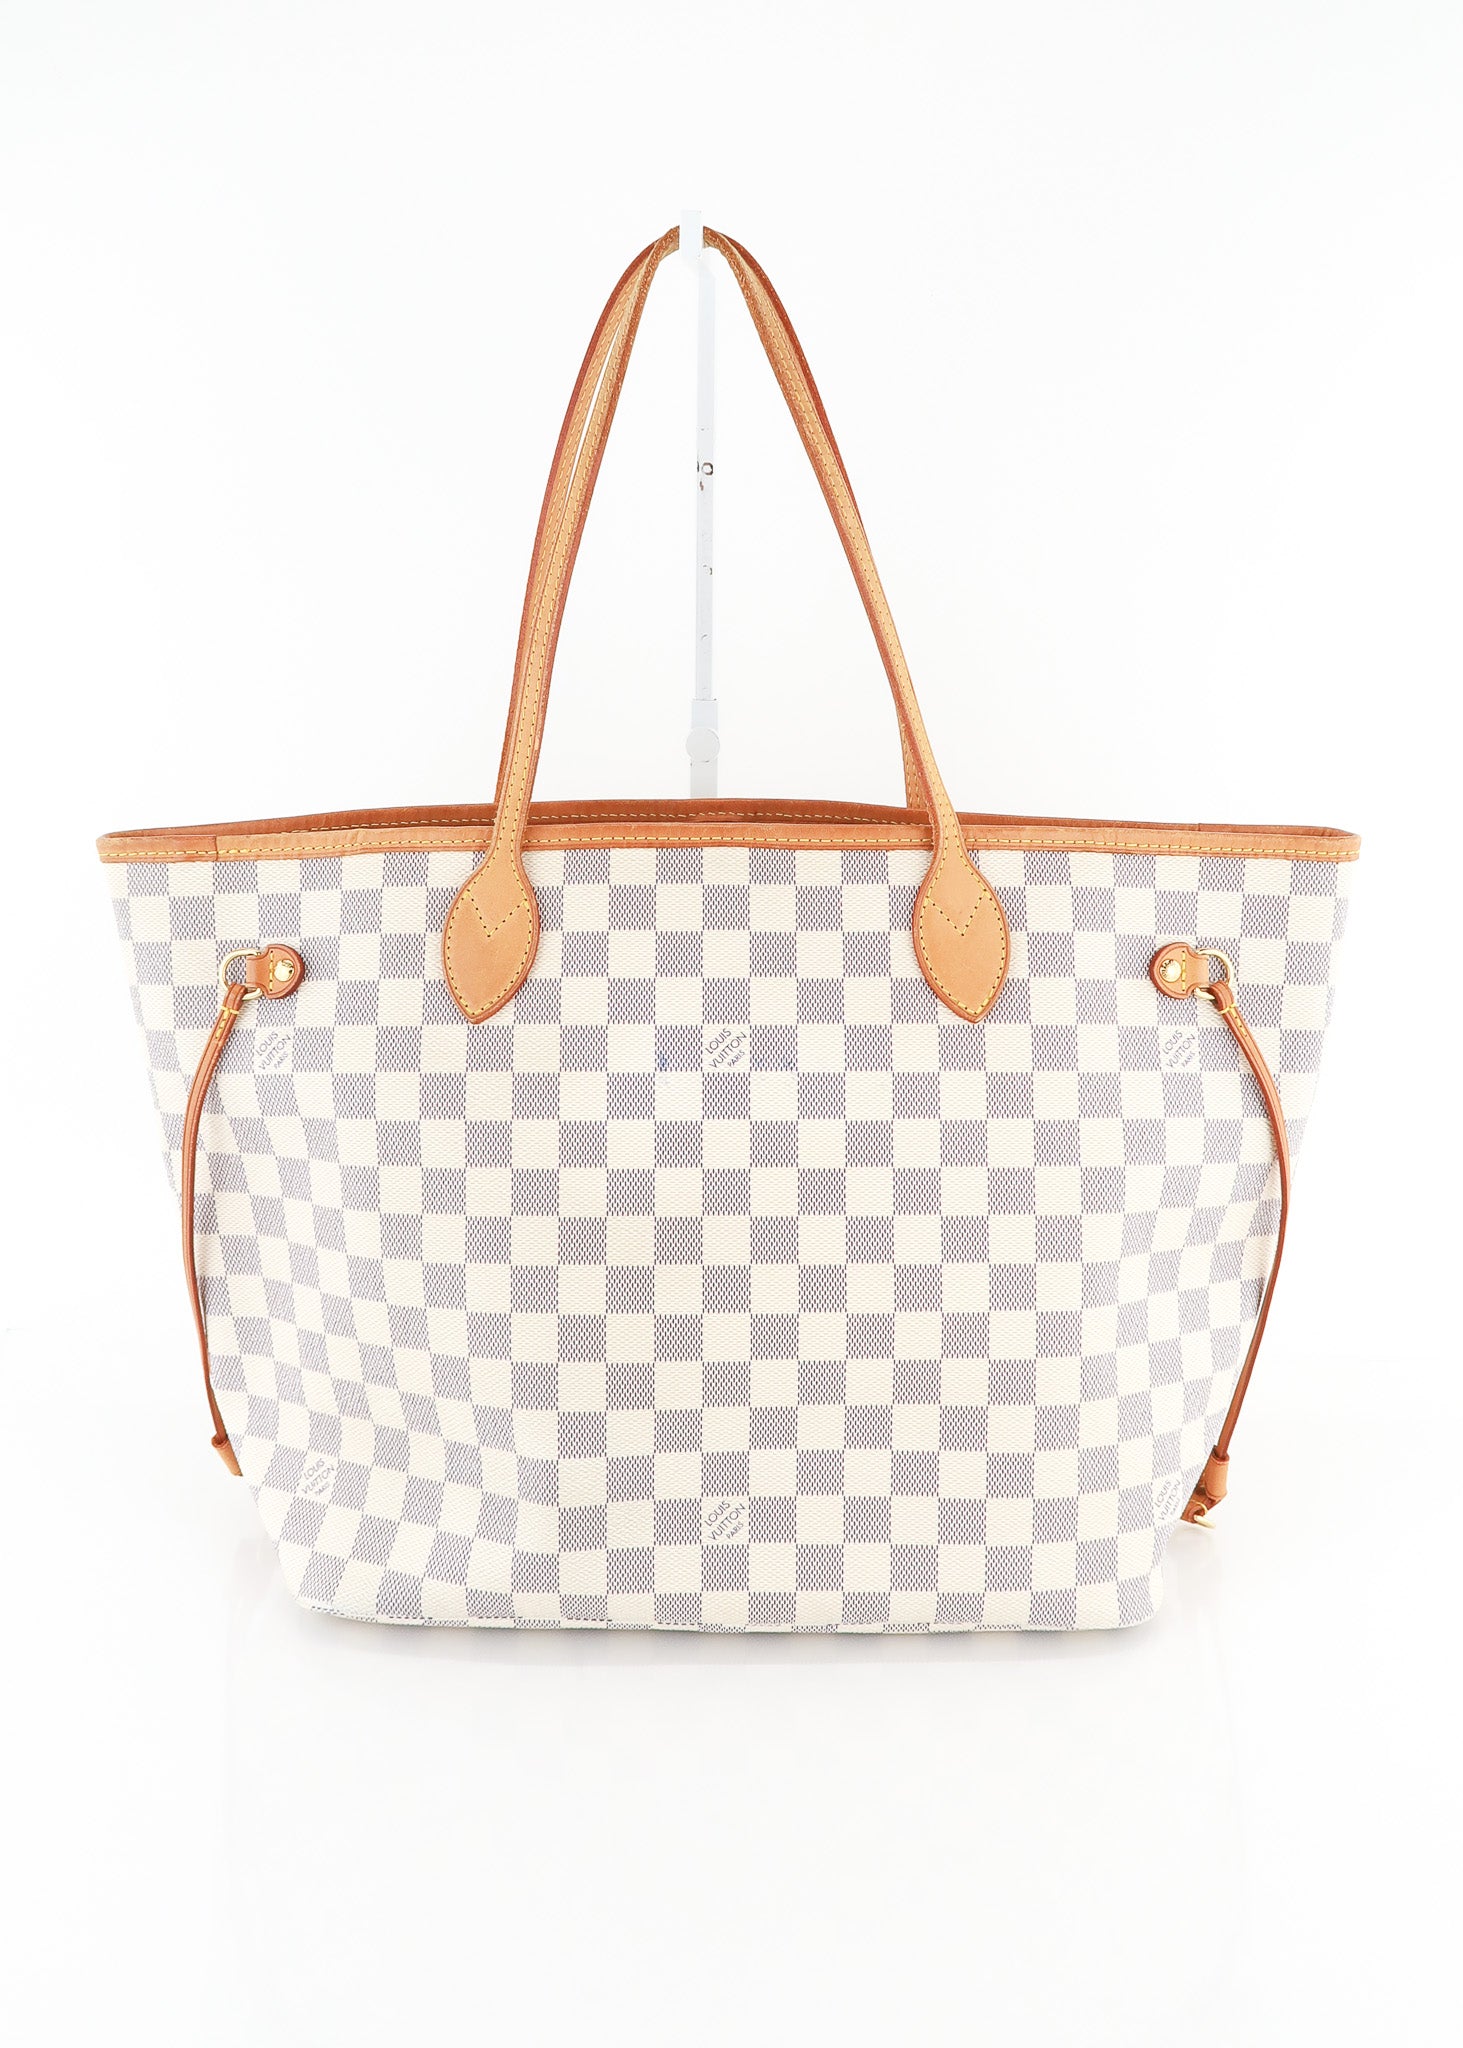 Authentic Louis Vuitton Damier Azur Neverfull MM Tote Bag N51107 Used F/S